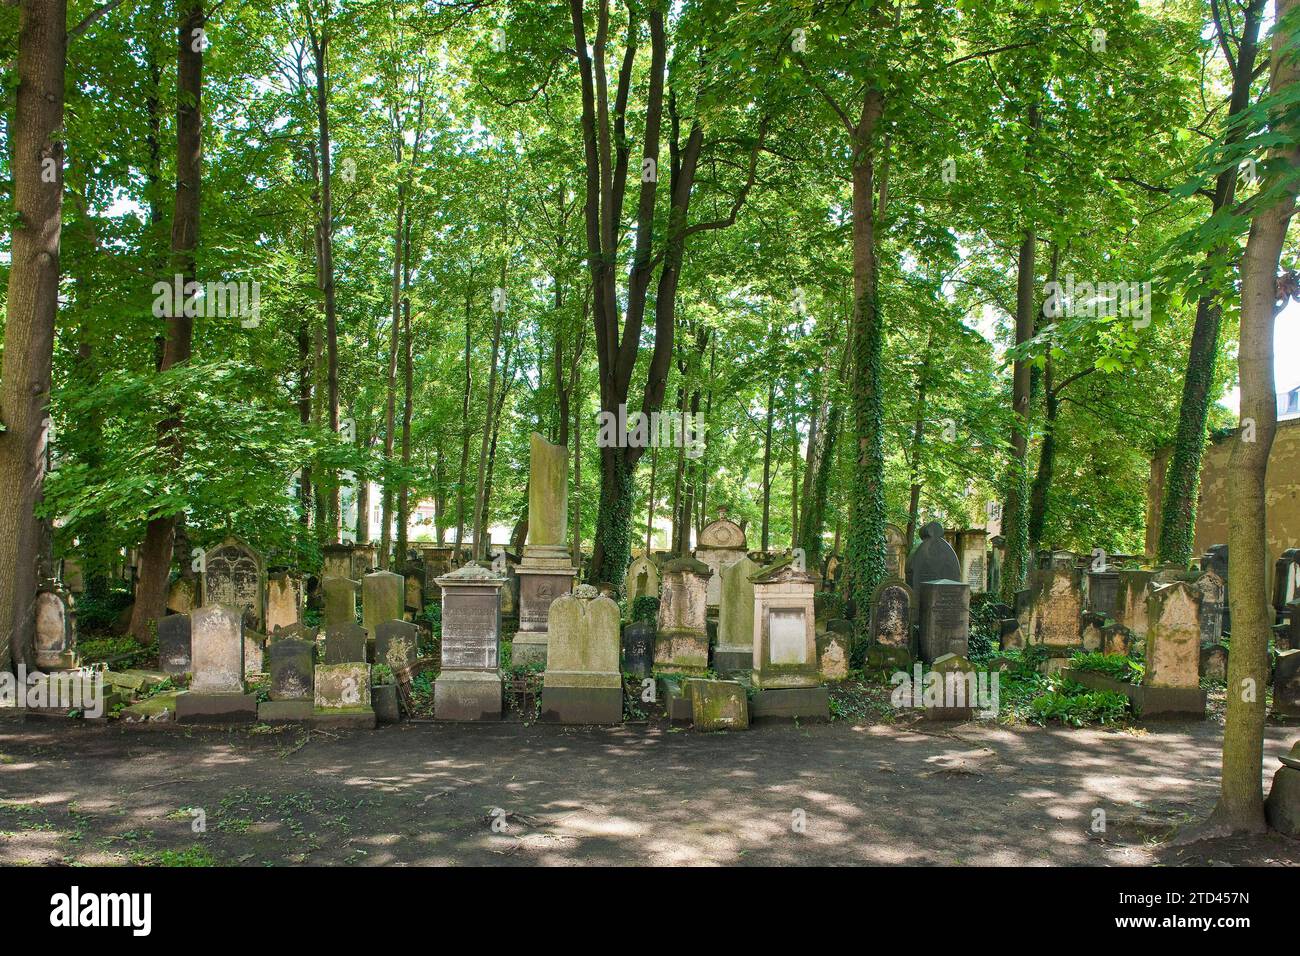 The Old Jewish Cemetery in Dresden is the oldest Jewish cemetery in Saxony. It is located on Pulsnitzer Strasse in the Neustadt district, near the Stock Photo